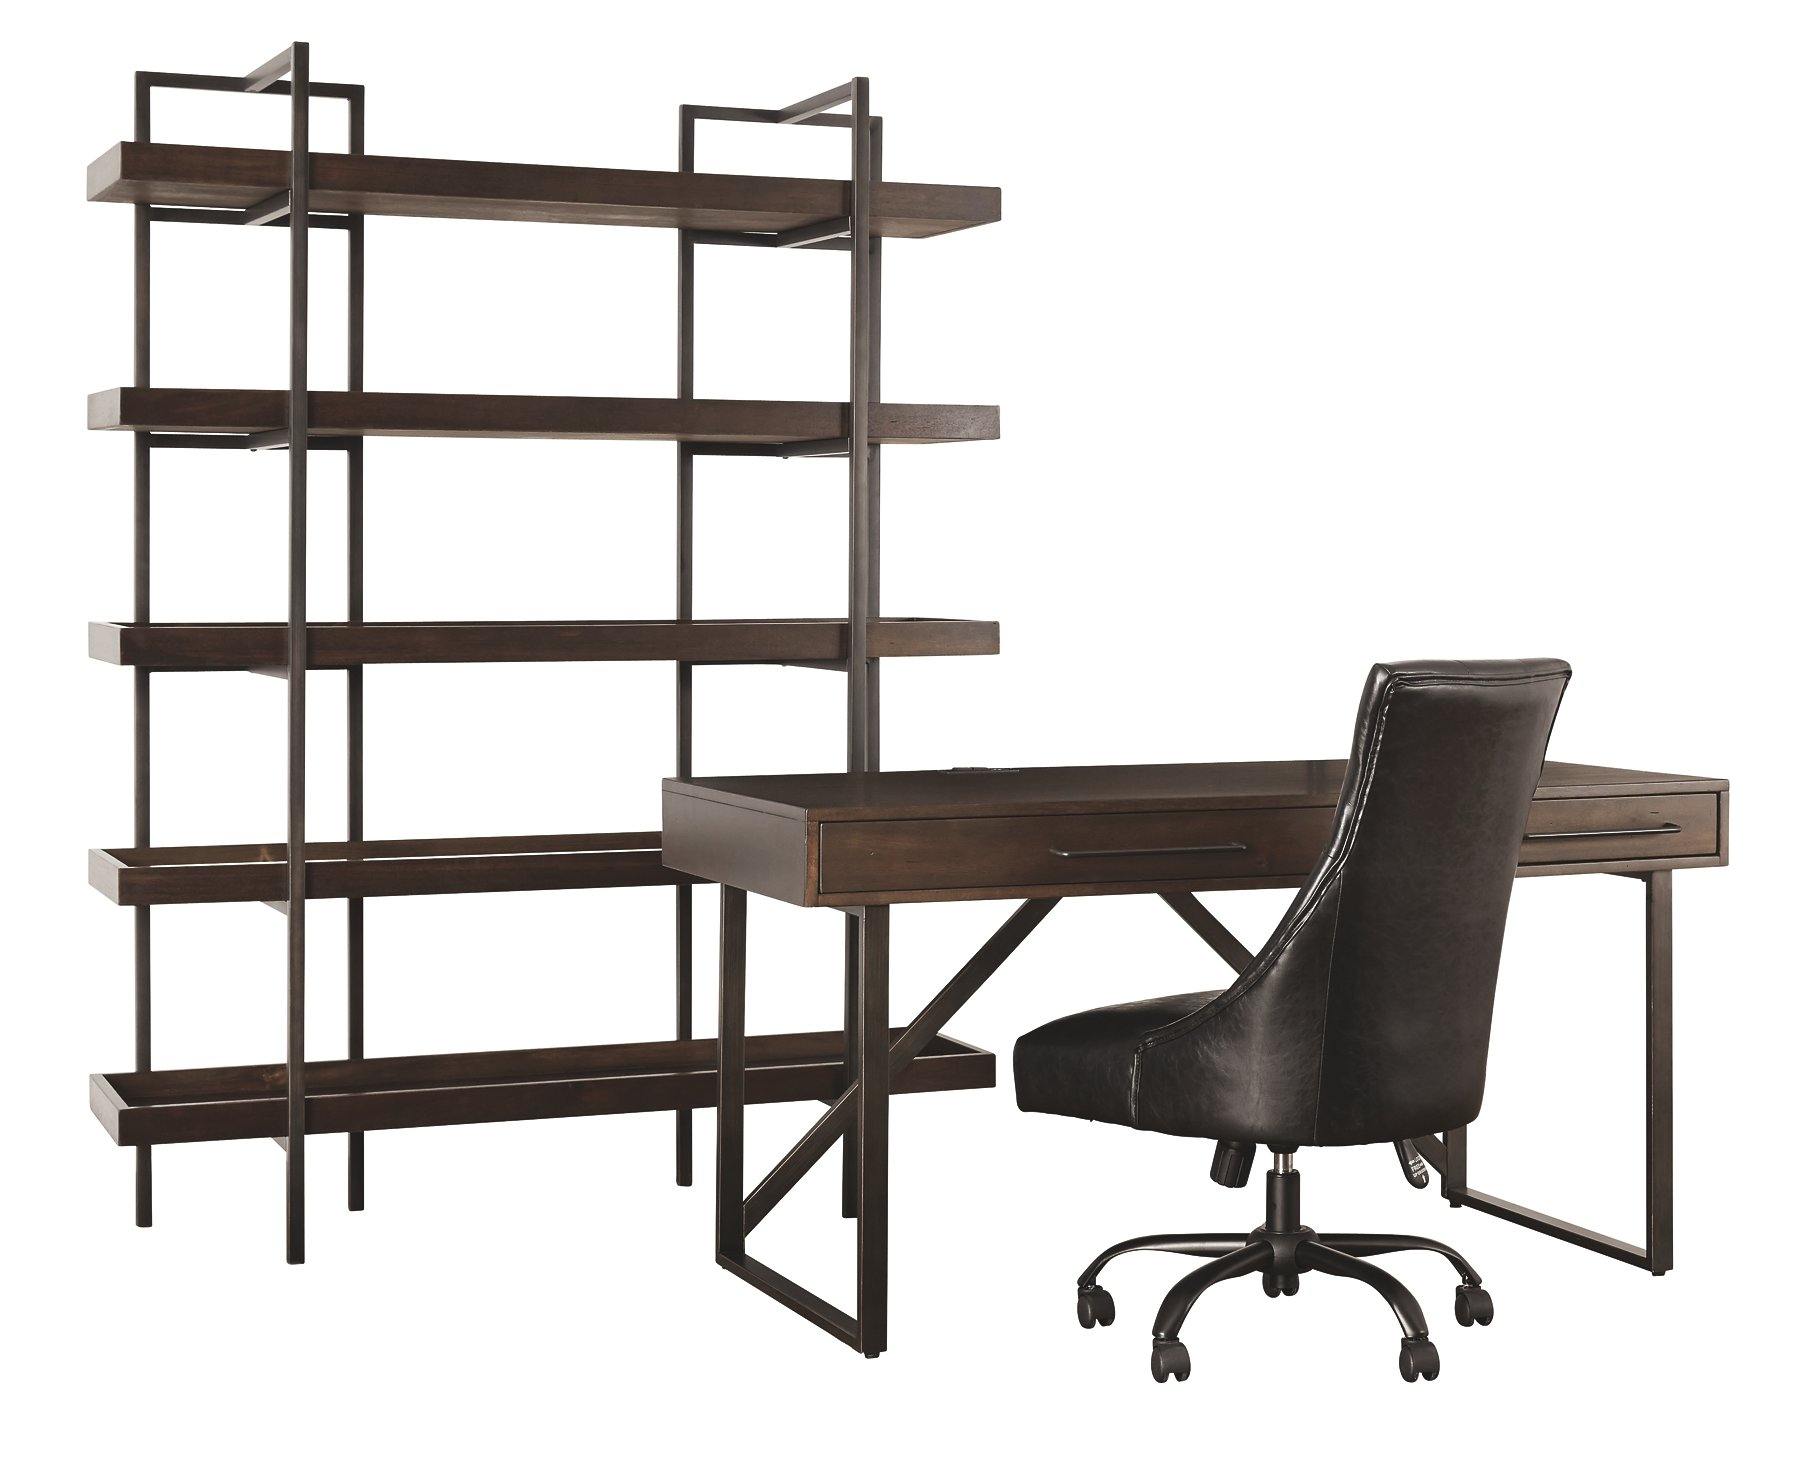 Brown Contemporary Starmore 60 Home Office Desk H633-34 By ashley - sofafair.com